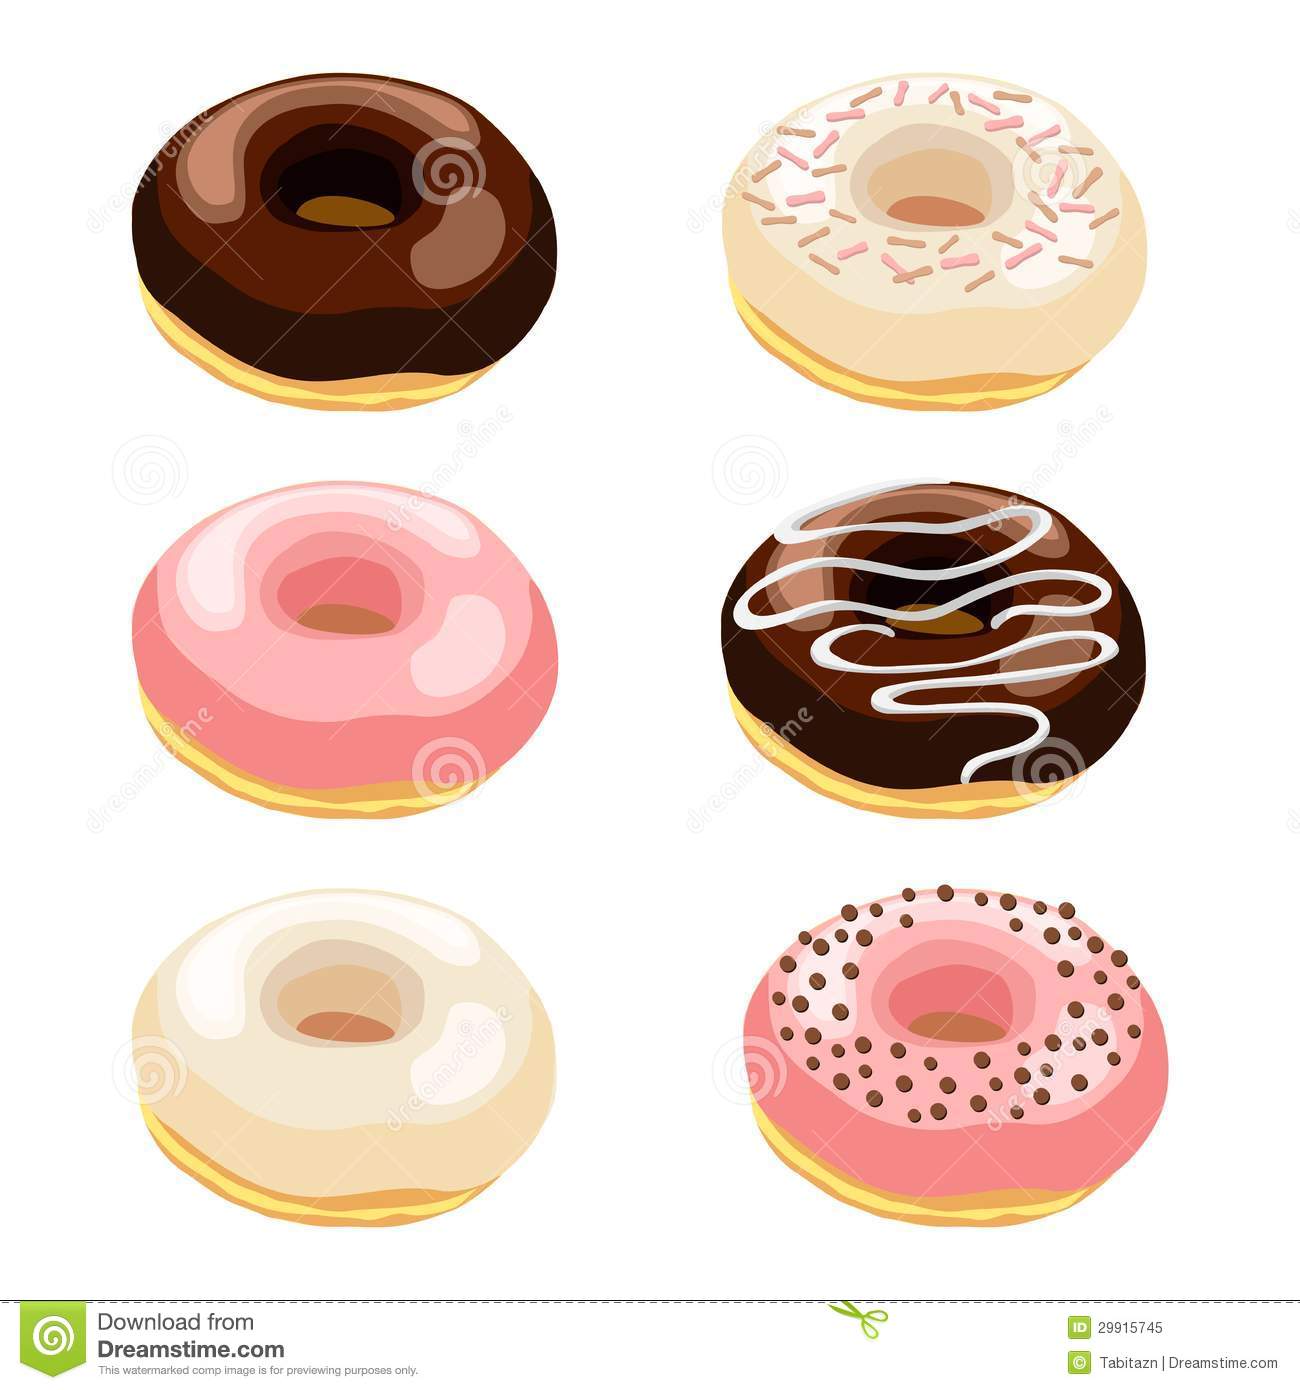 Vector Illustration Set Of Donuts With Various Top Royalty Free Stock